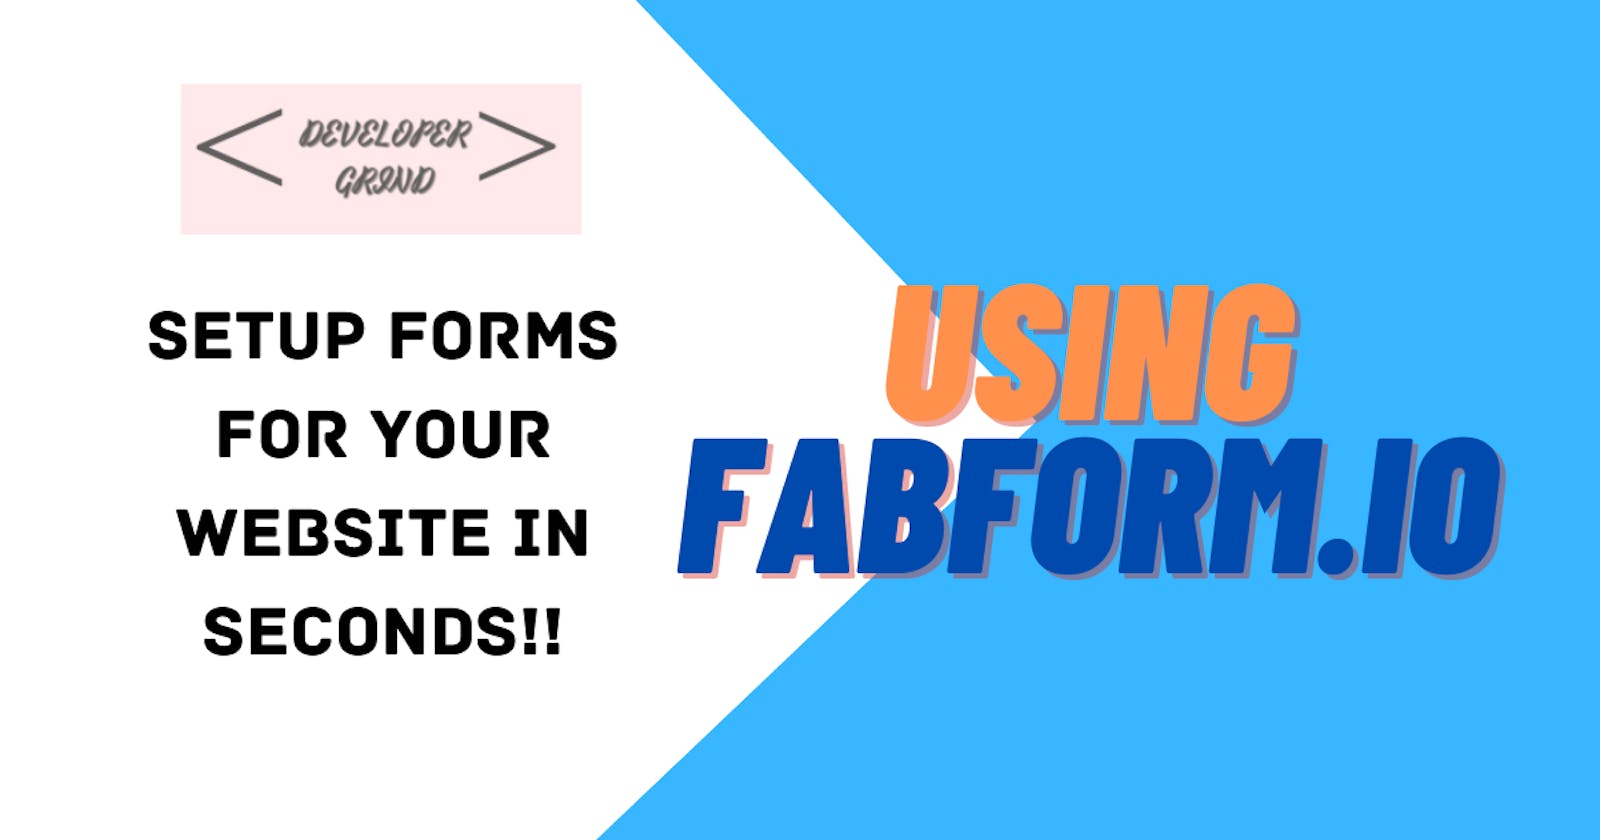 Setup forms for your website in seconds!!